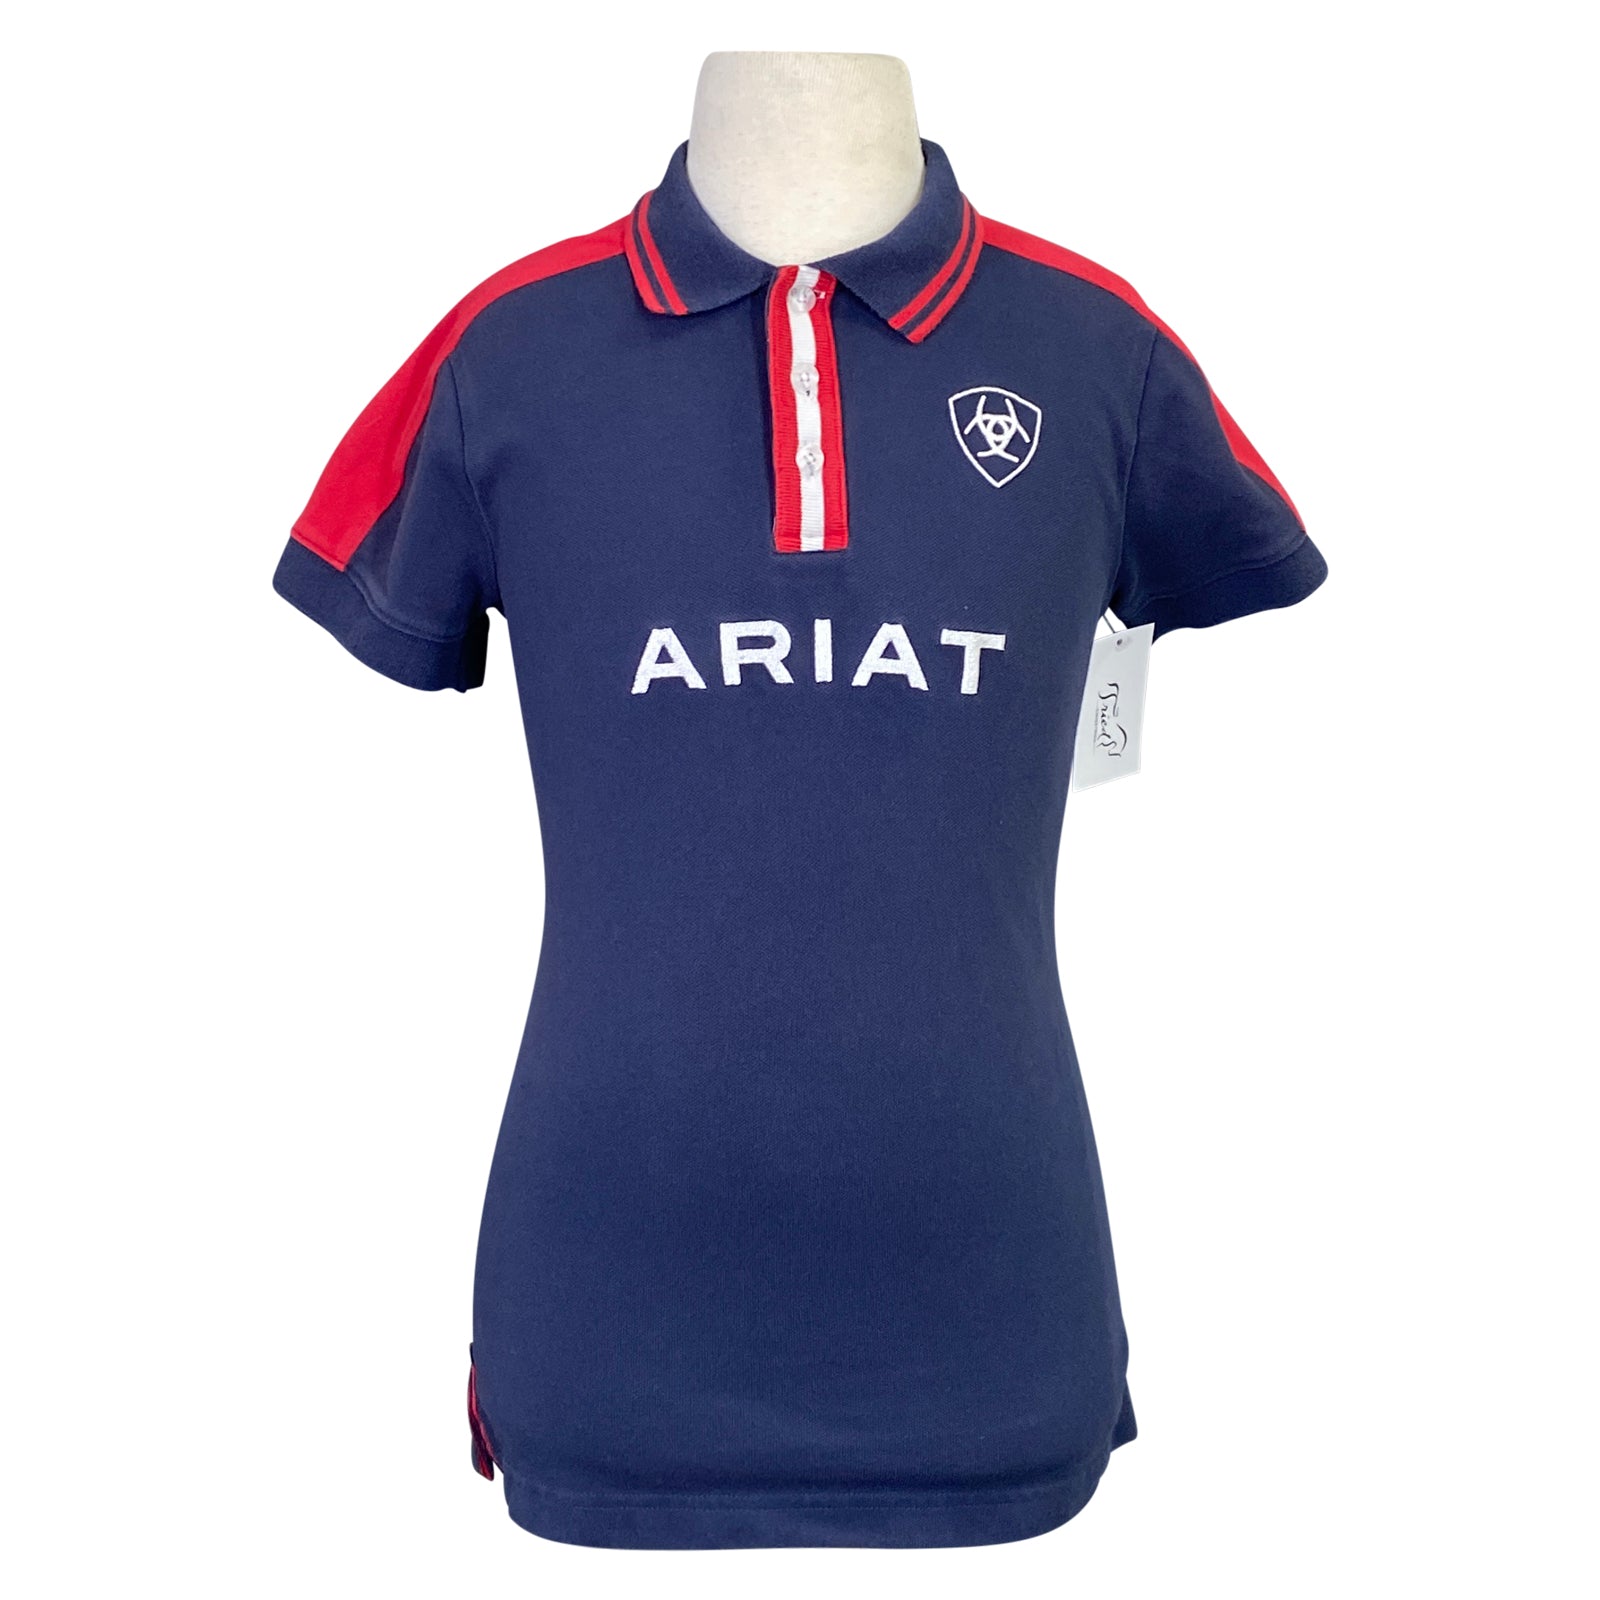 Ariat Team Polo in Navy